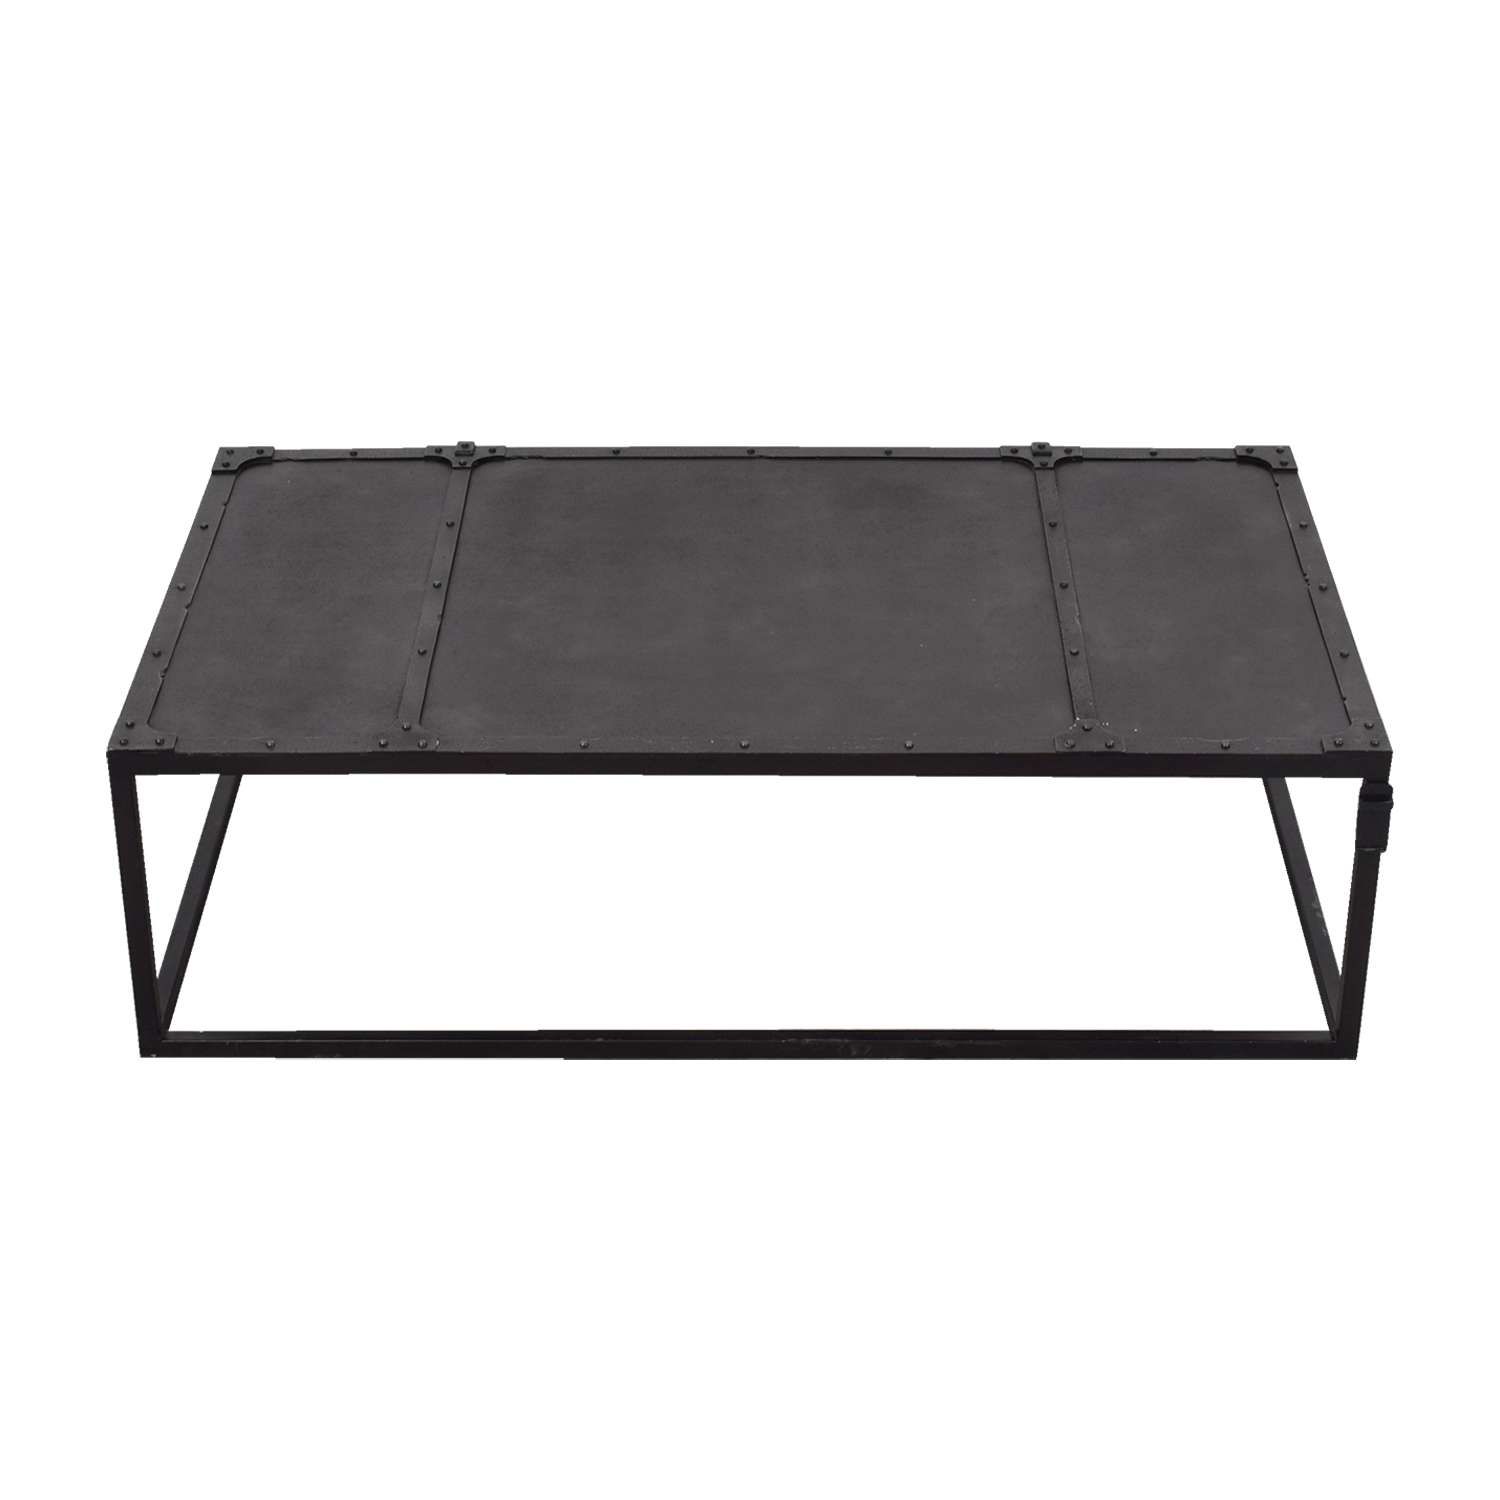 [%best And Newest Black Coffee Tables Inside 56% Off – Restoration Hardware Restoration Hardware Tesoro Black|56% Off – Restoration Hardware Restoration Hardware Tesoro Black Pertaining To Well Known Black Coffee Tables%] (Gallery 20 of 20)